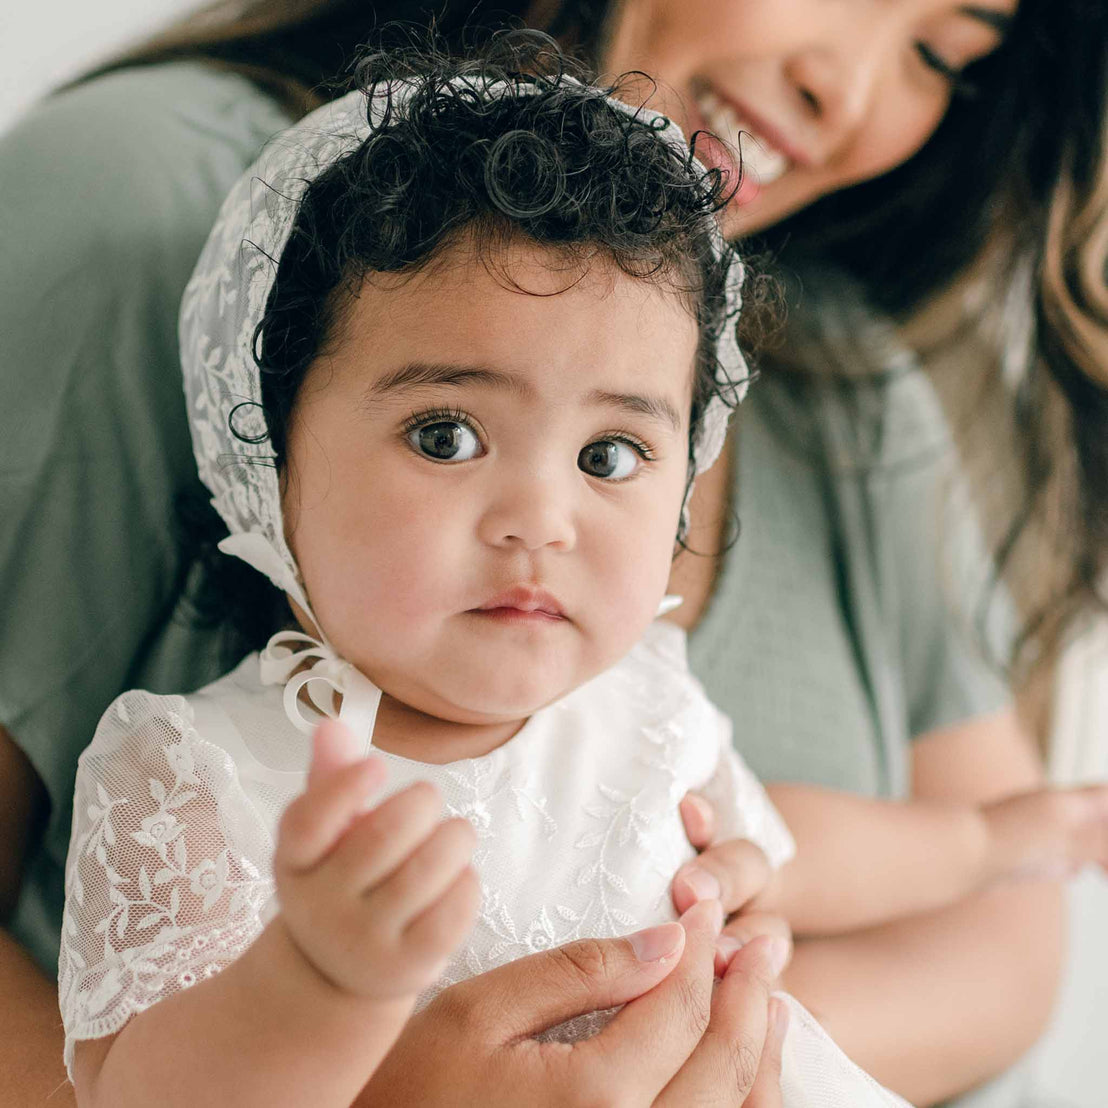 A baby with dark curly hair wearing an Ella Lace Bonnet and dress with silk ribbon ties is being held by an adult. The baby looks directly at the camera with a neutral expression, while the adult smiles in the background.